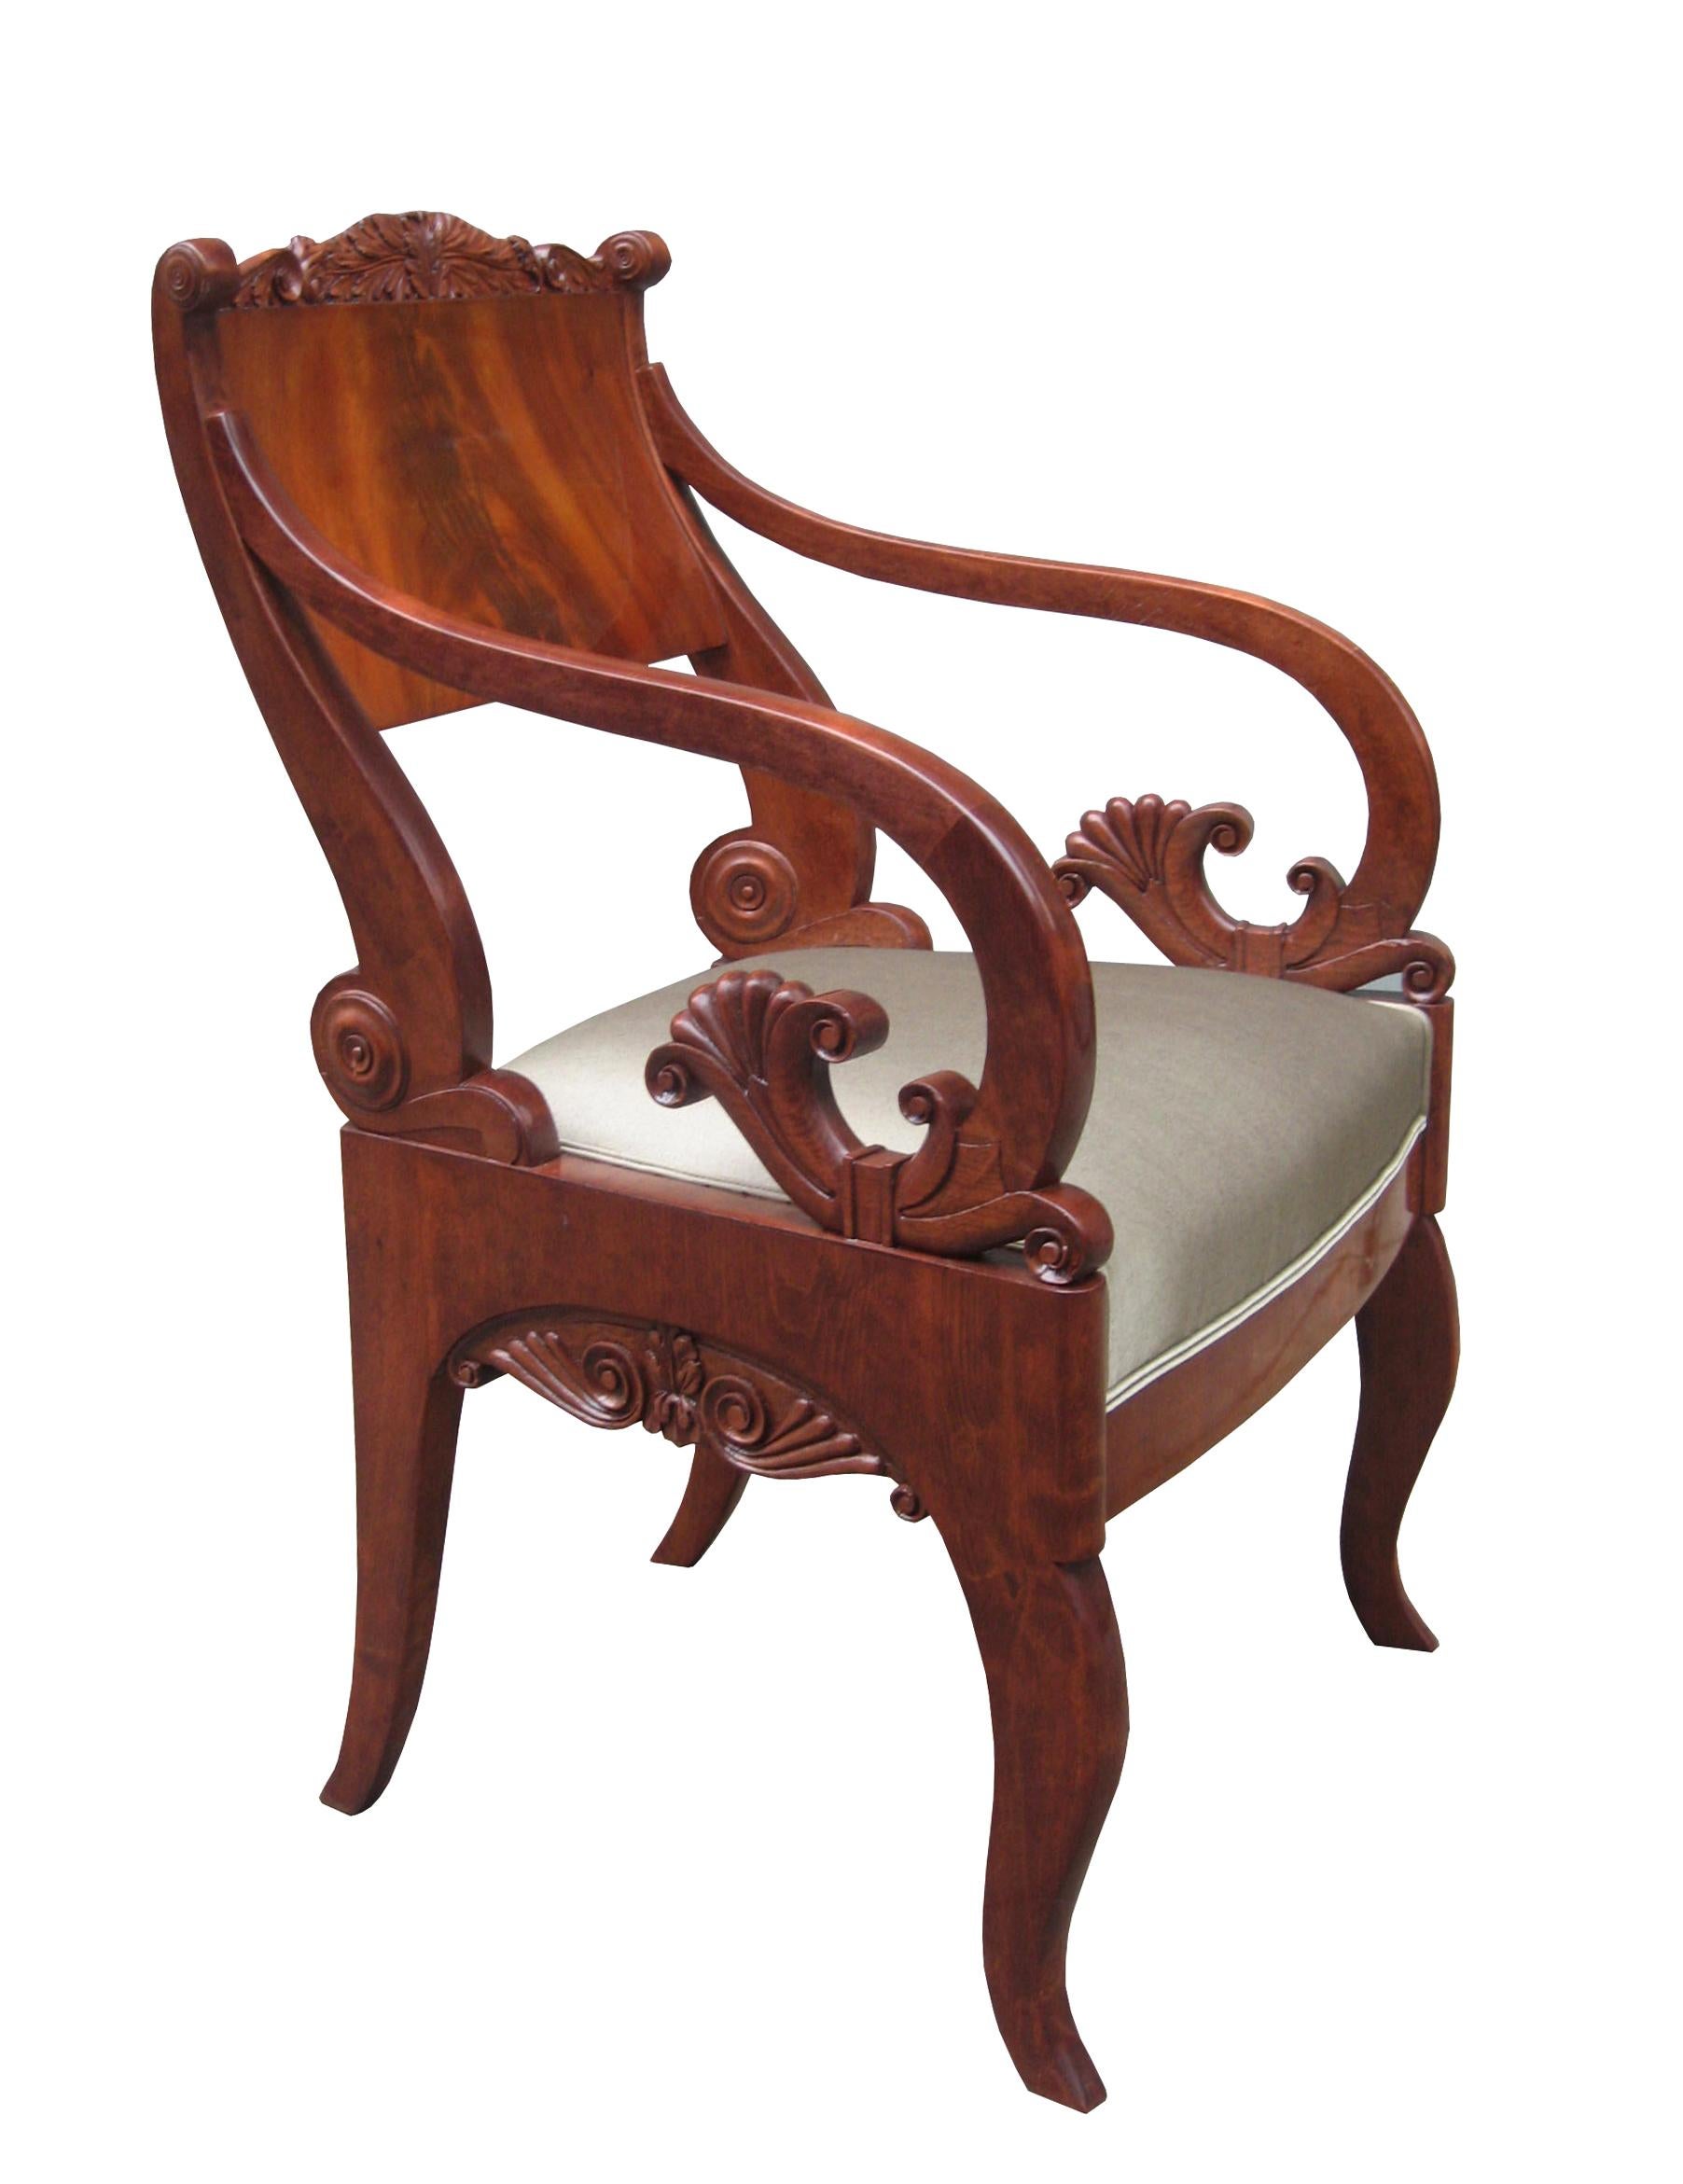 A fine pair of Empire armchairs.
Solid mahogany with fine carved details throughout.